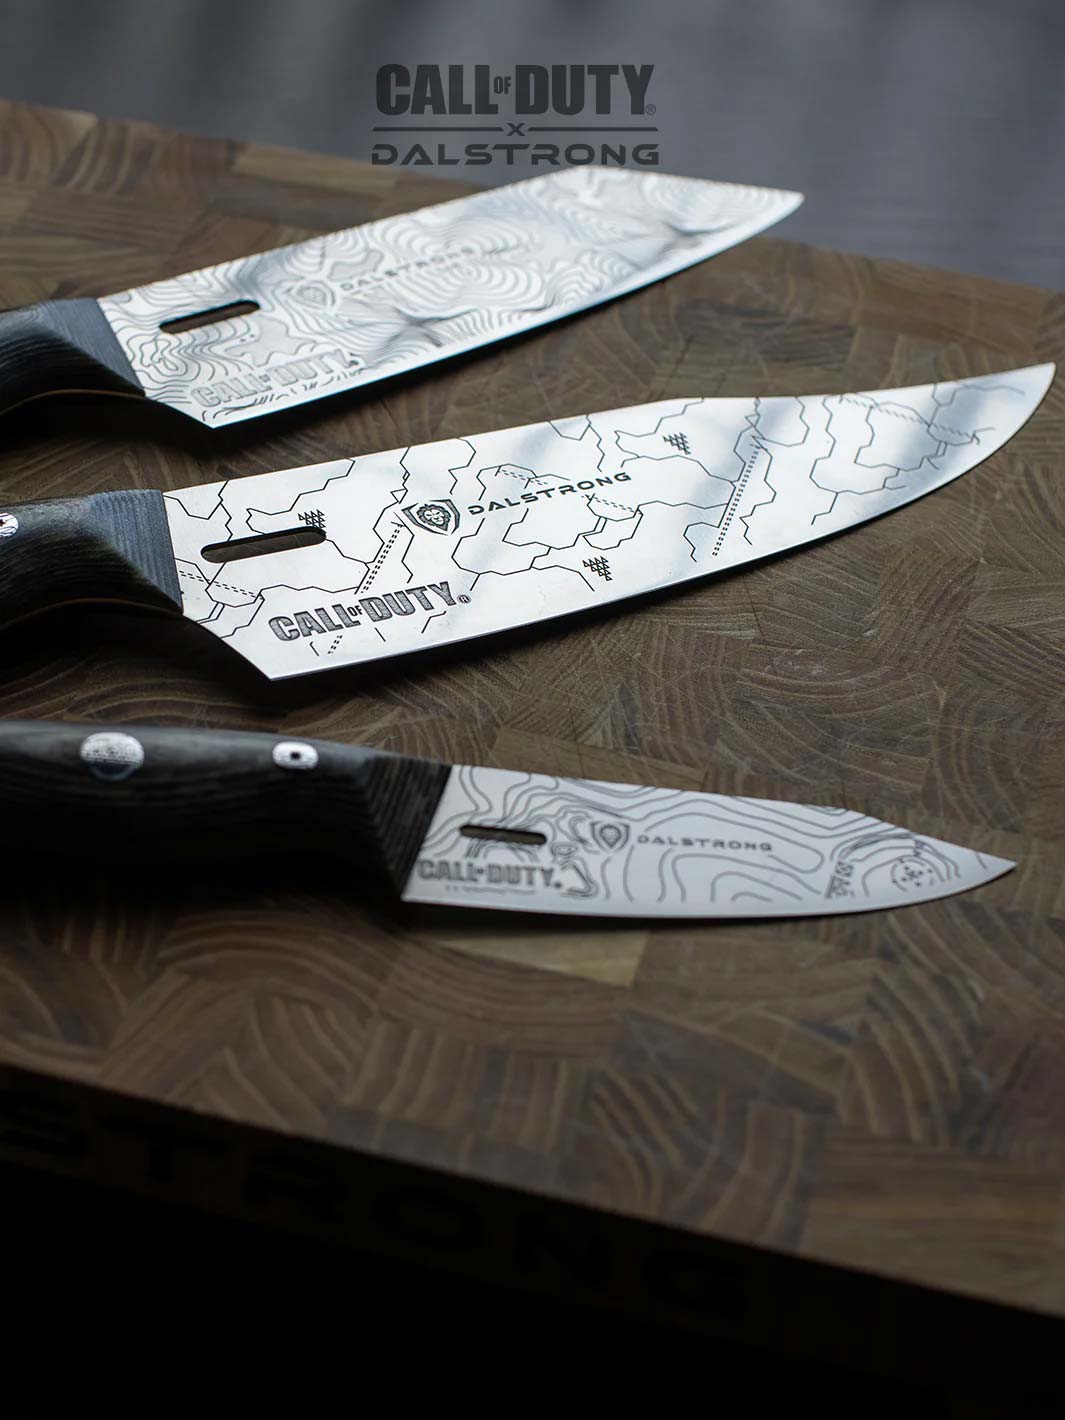 Dalstrong call of duty series 3 piece knife set on a cutting board.